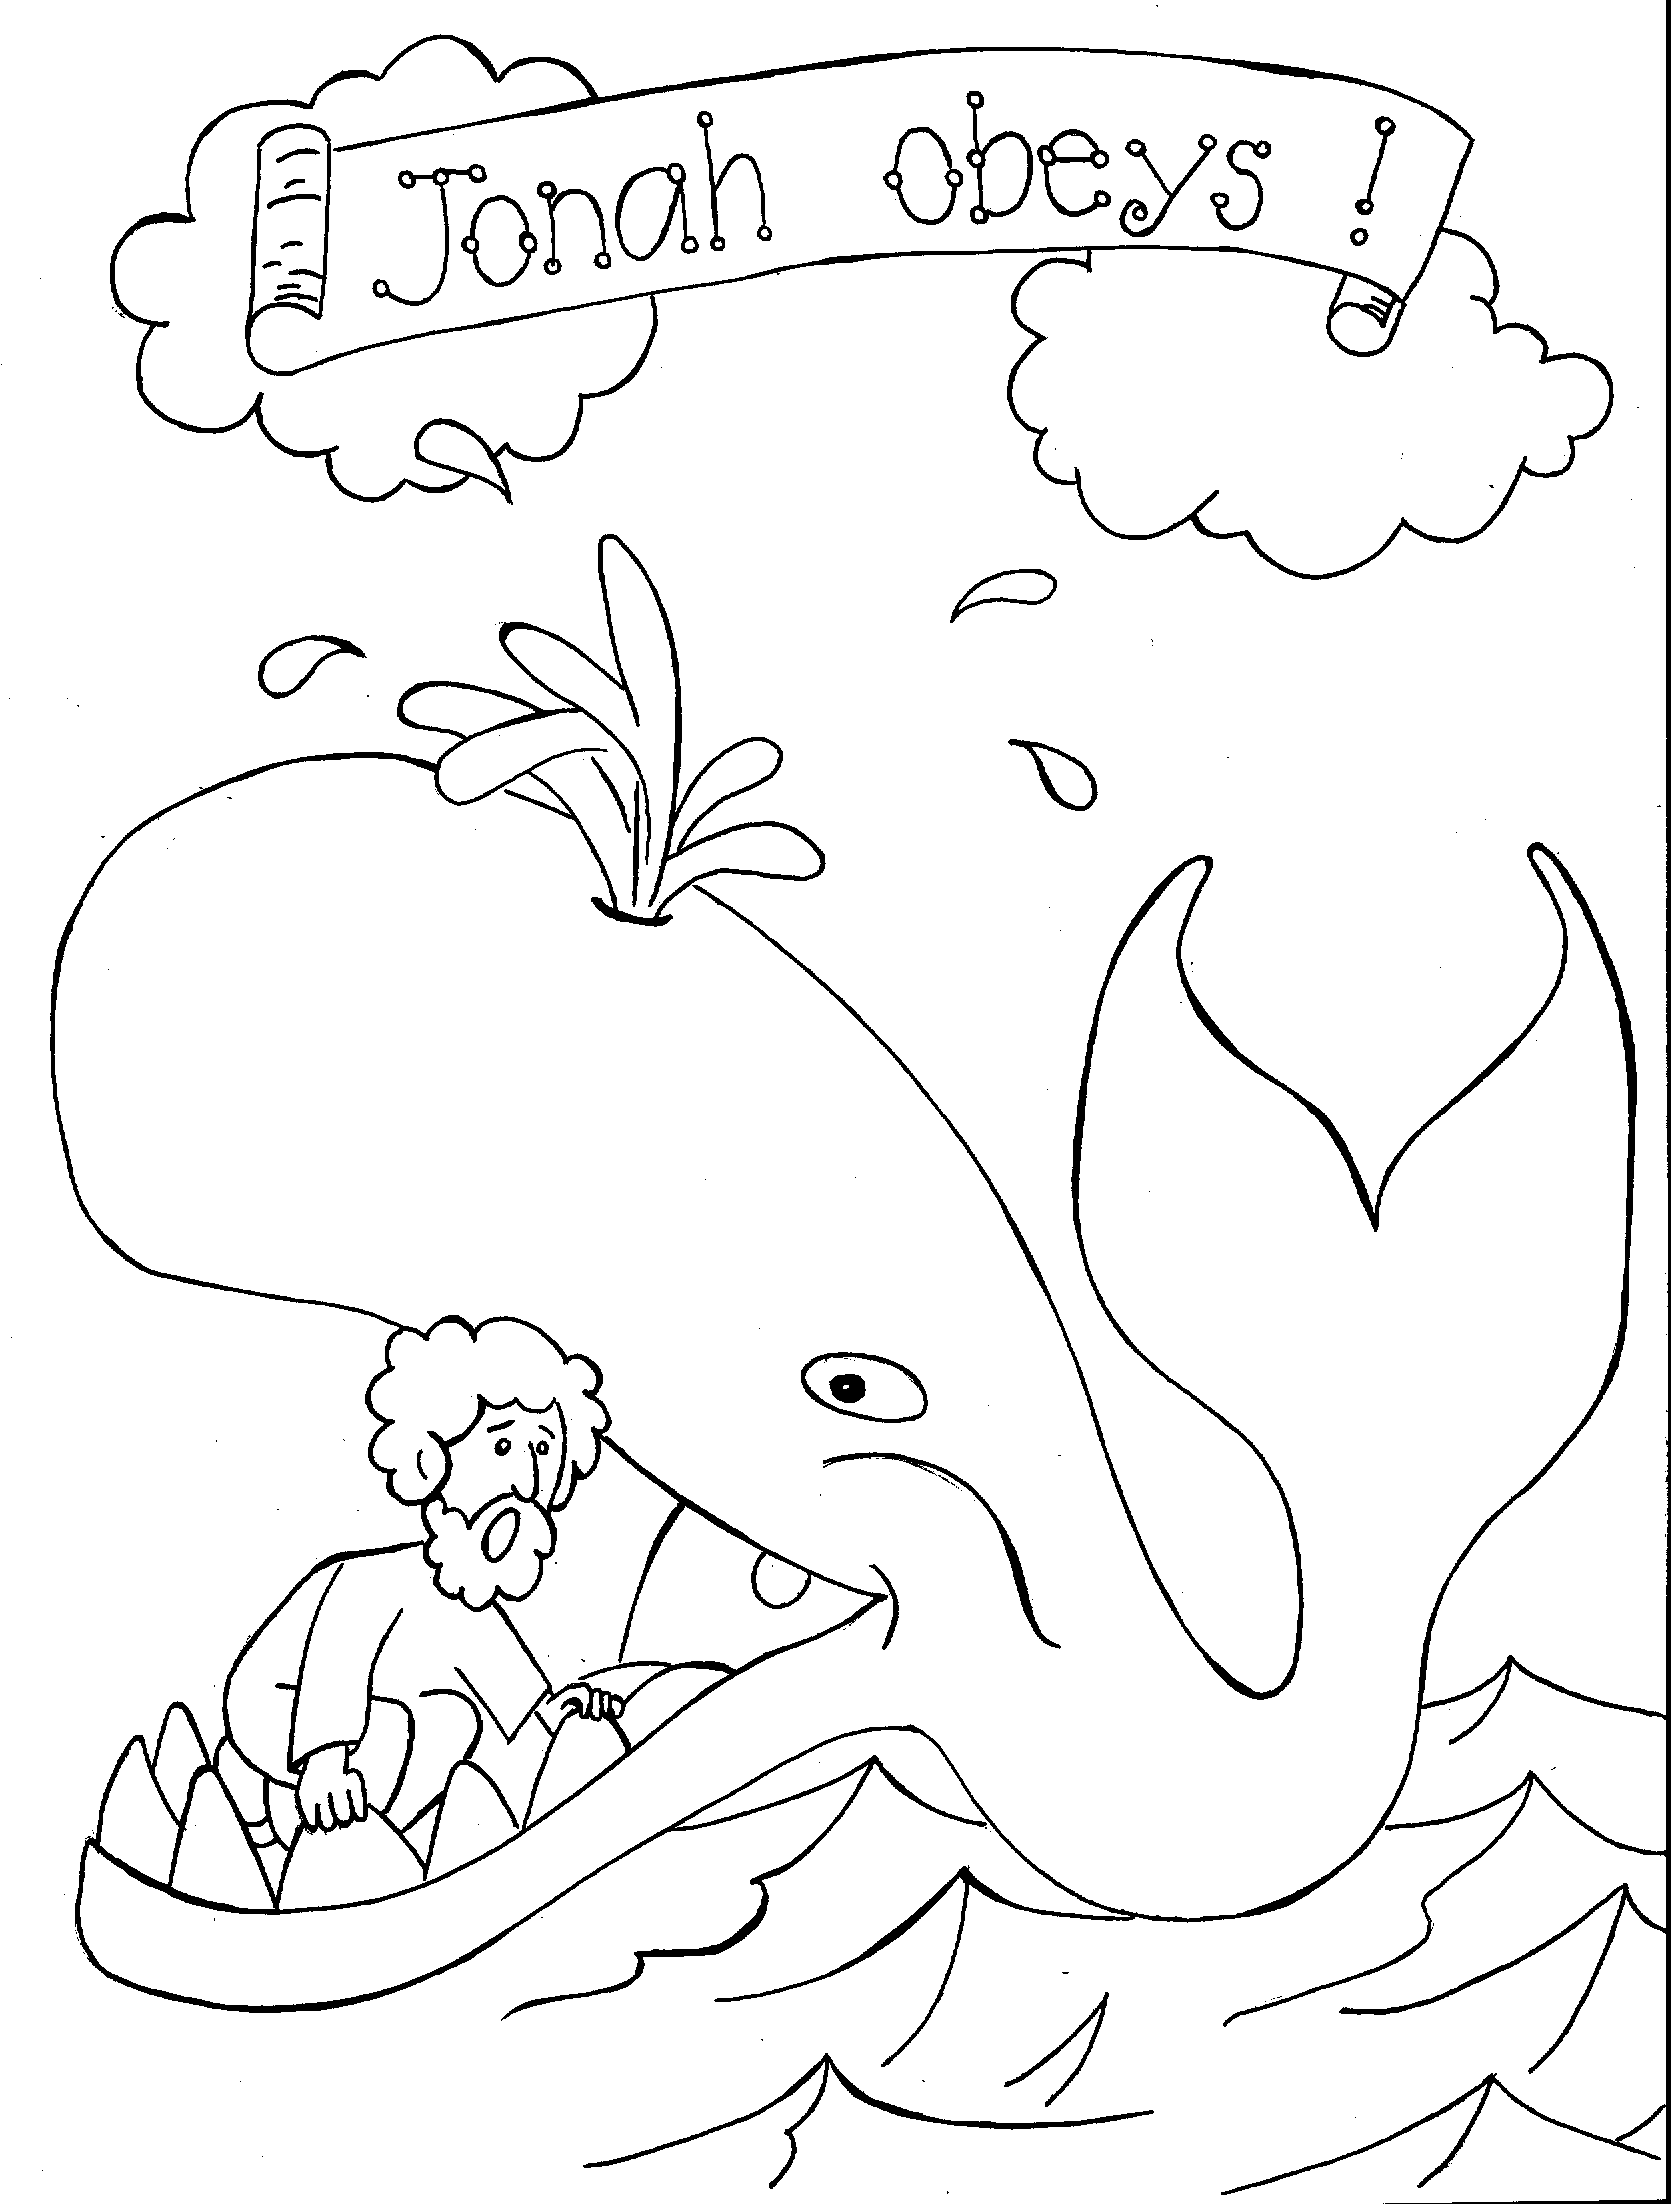 jonah coloring pages